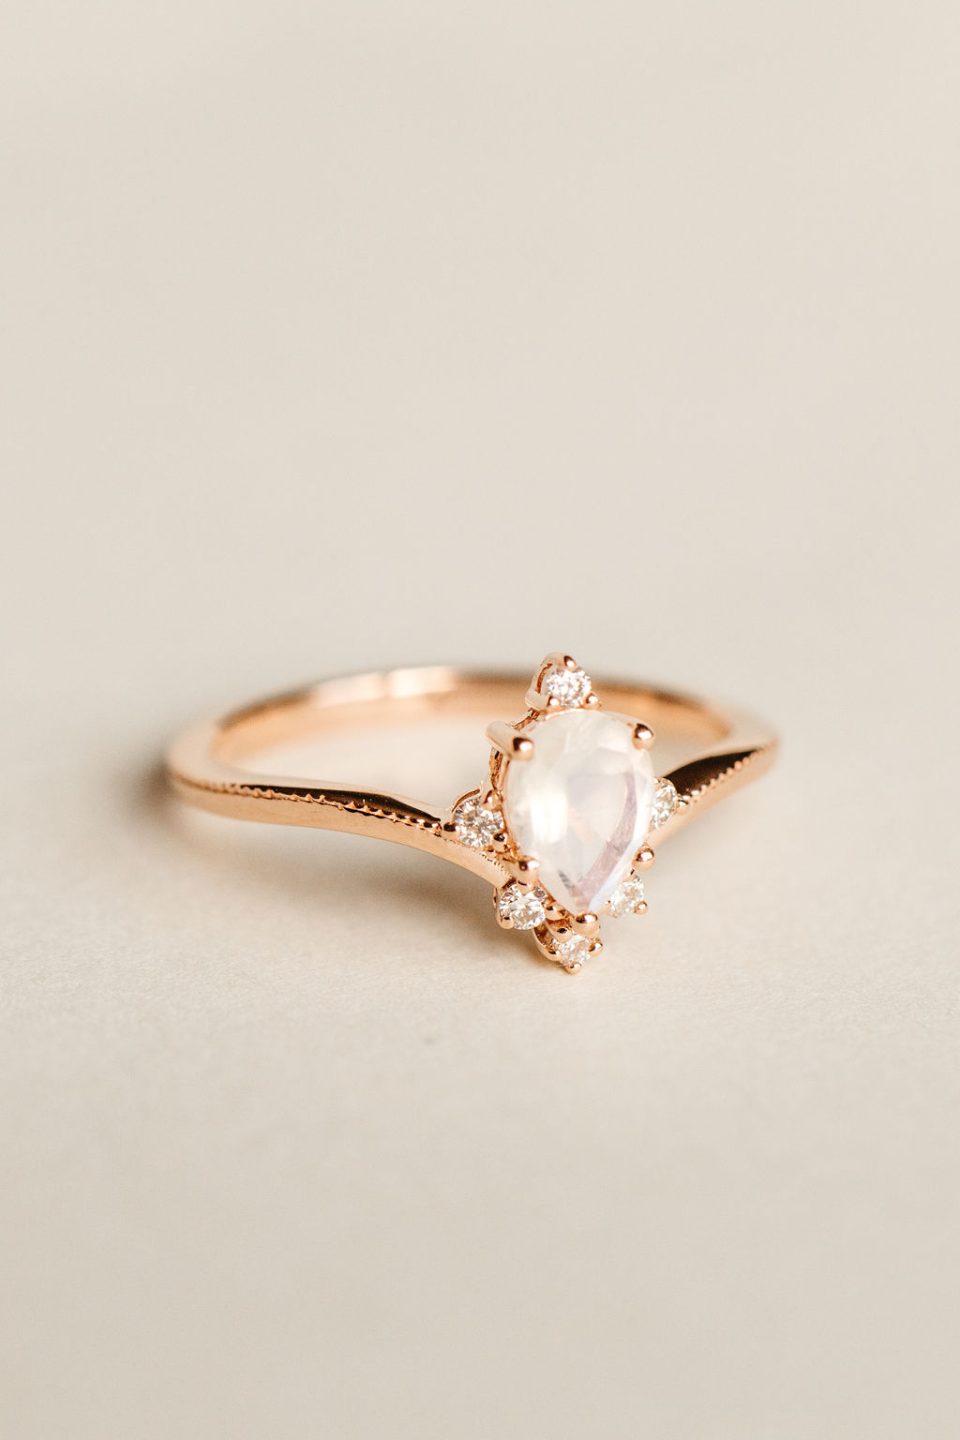 Ring with 7X5MM Pear Shape Rainbow Moonstone and .12 Carat TW Diamonds in 10kt Rose Gold